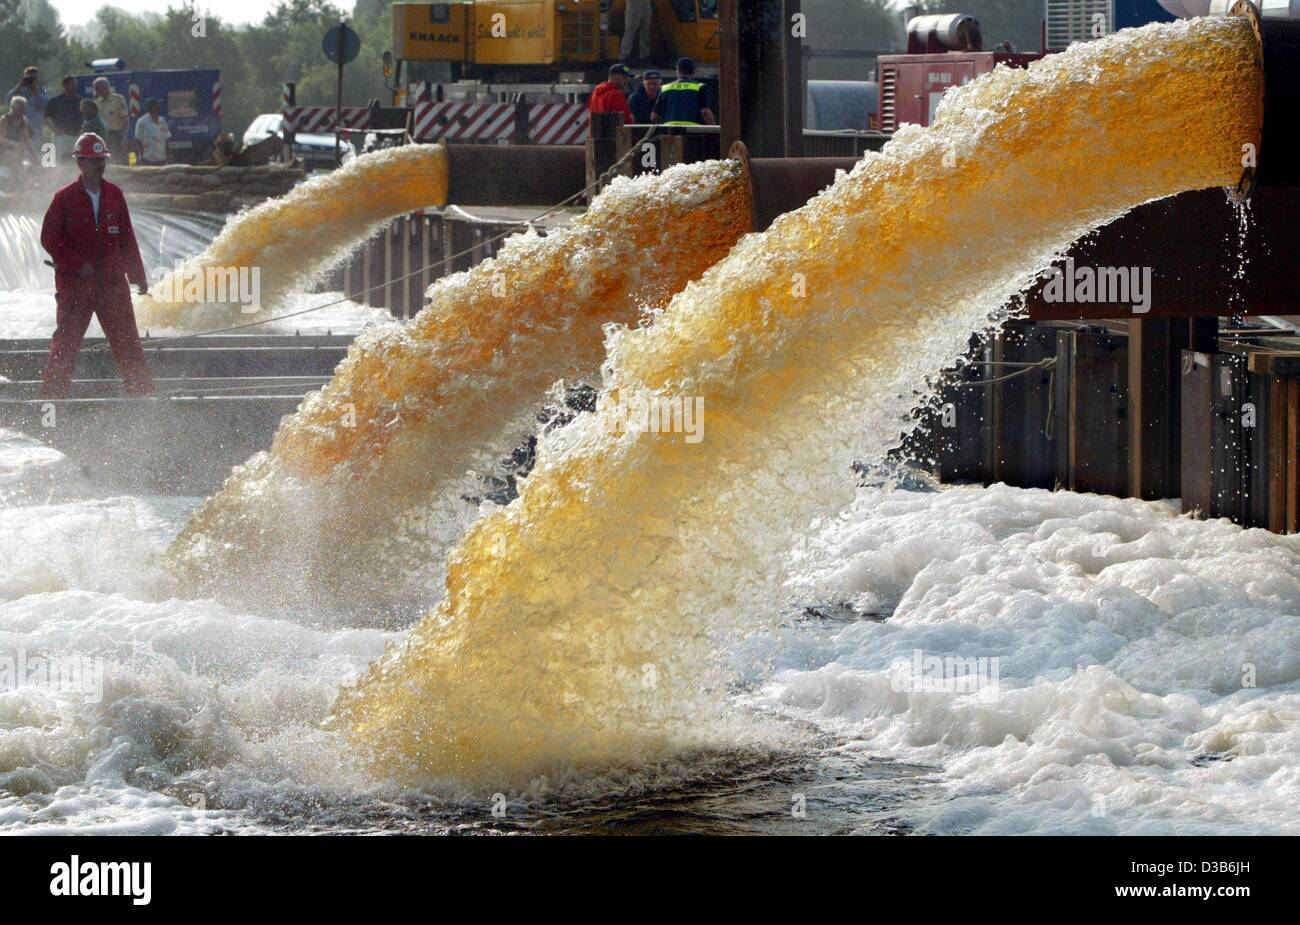 (dpa) - The water of the river Elbe is pumped into the Elbe Jeetzel Canal in order to protect the city of Dannenberg, Germany, from being overflooded, 22 August 2002. The water pressure against the soaking-wet dykes is still a big threat. Stock Photo